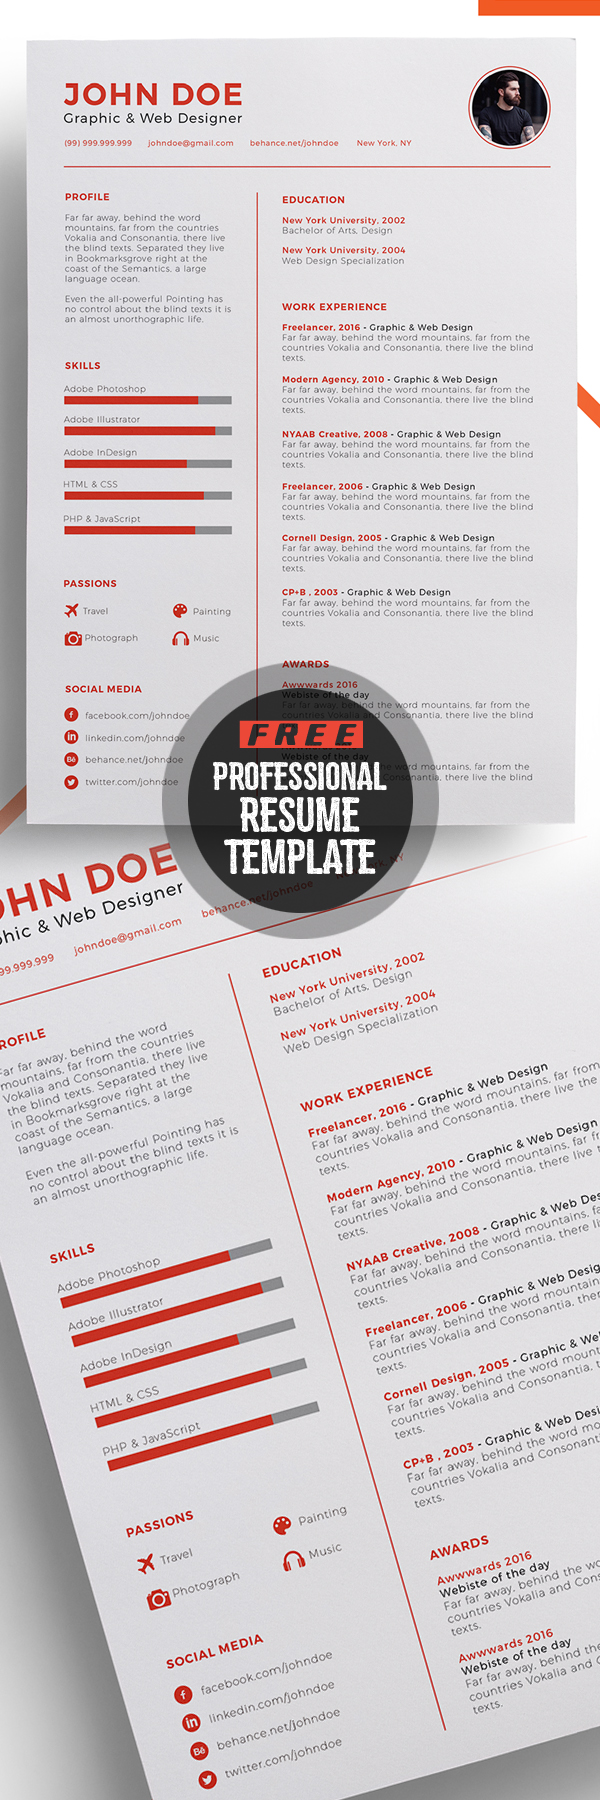 50 Free Resume Templates: Best Of 2018 -  50